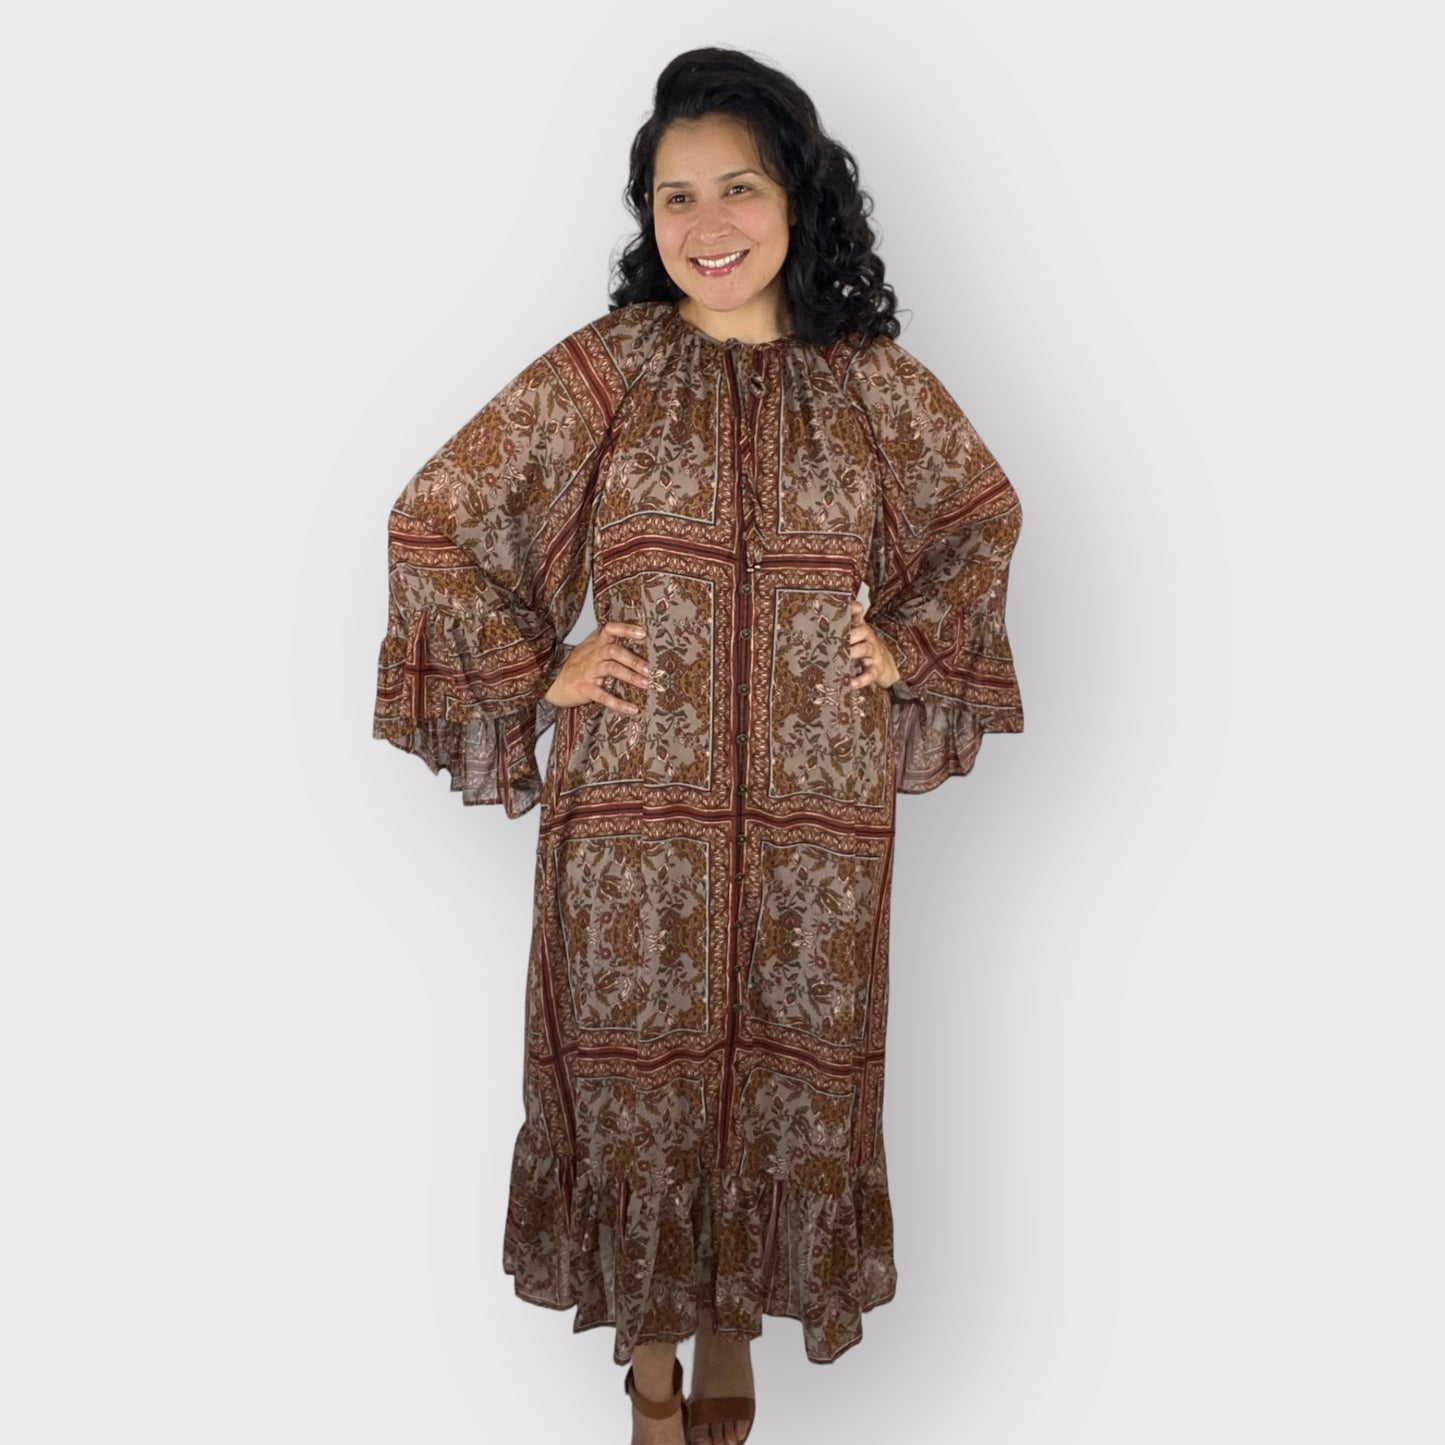 Butterfly Button Down Dress - Antique Rosewood